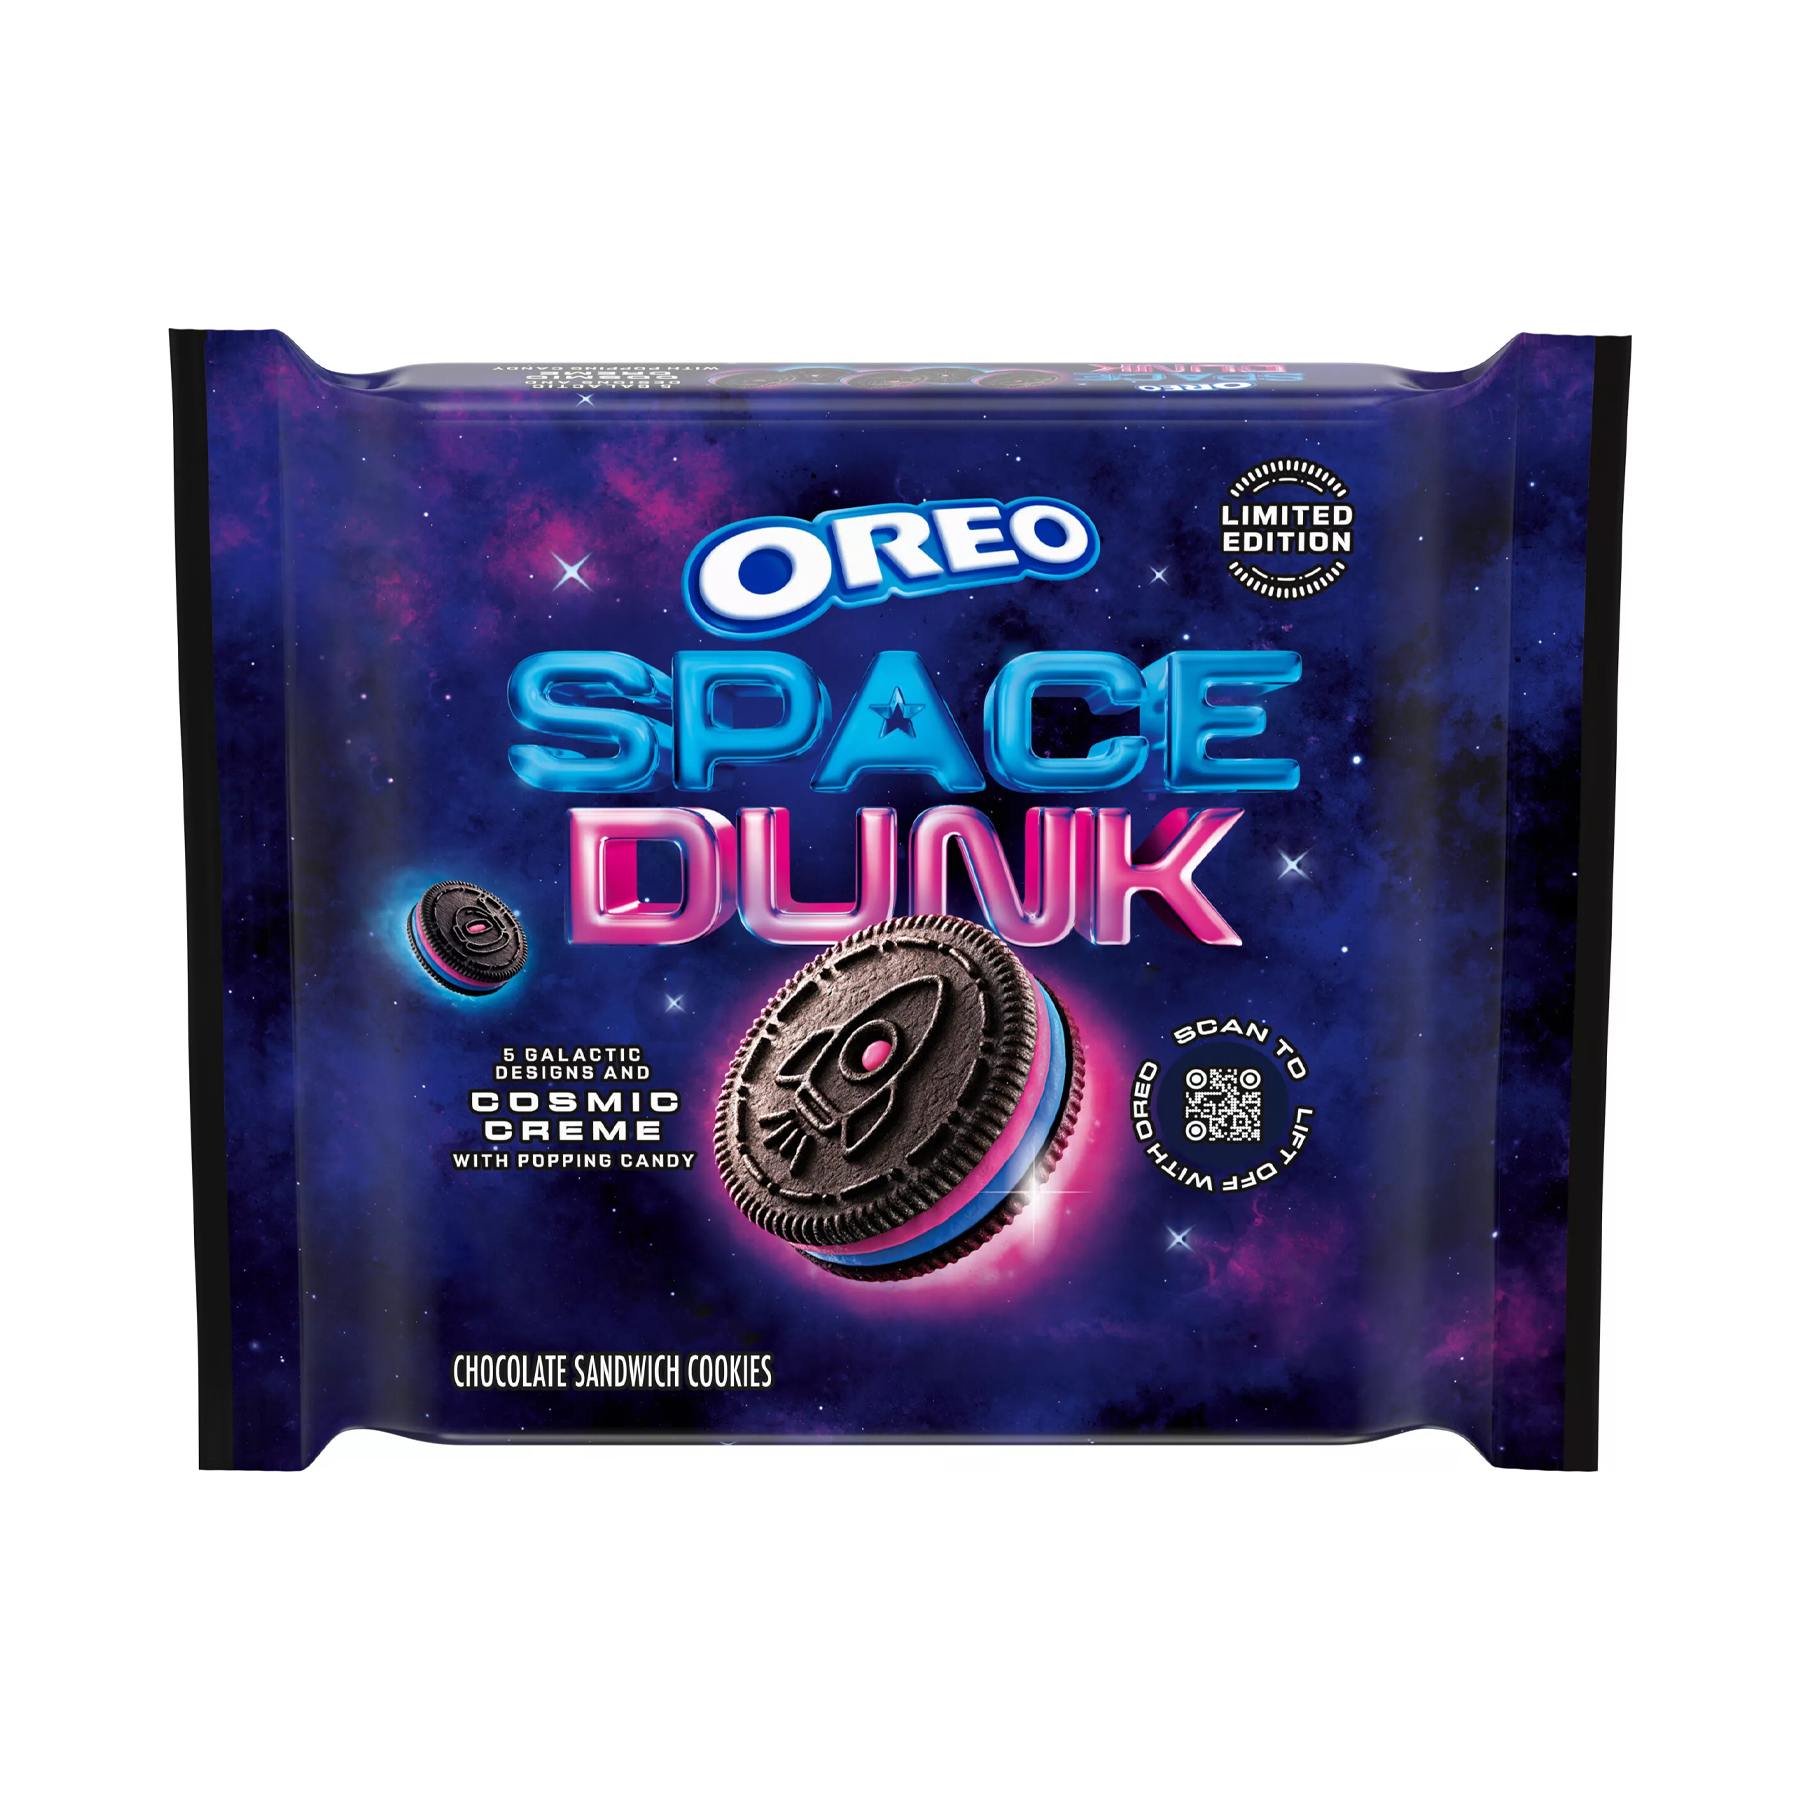 OREO Space Dunk Cookies - Limited Edition (10.68 oz)